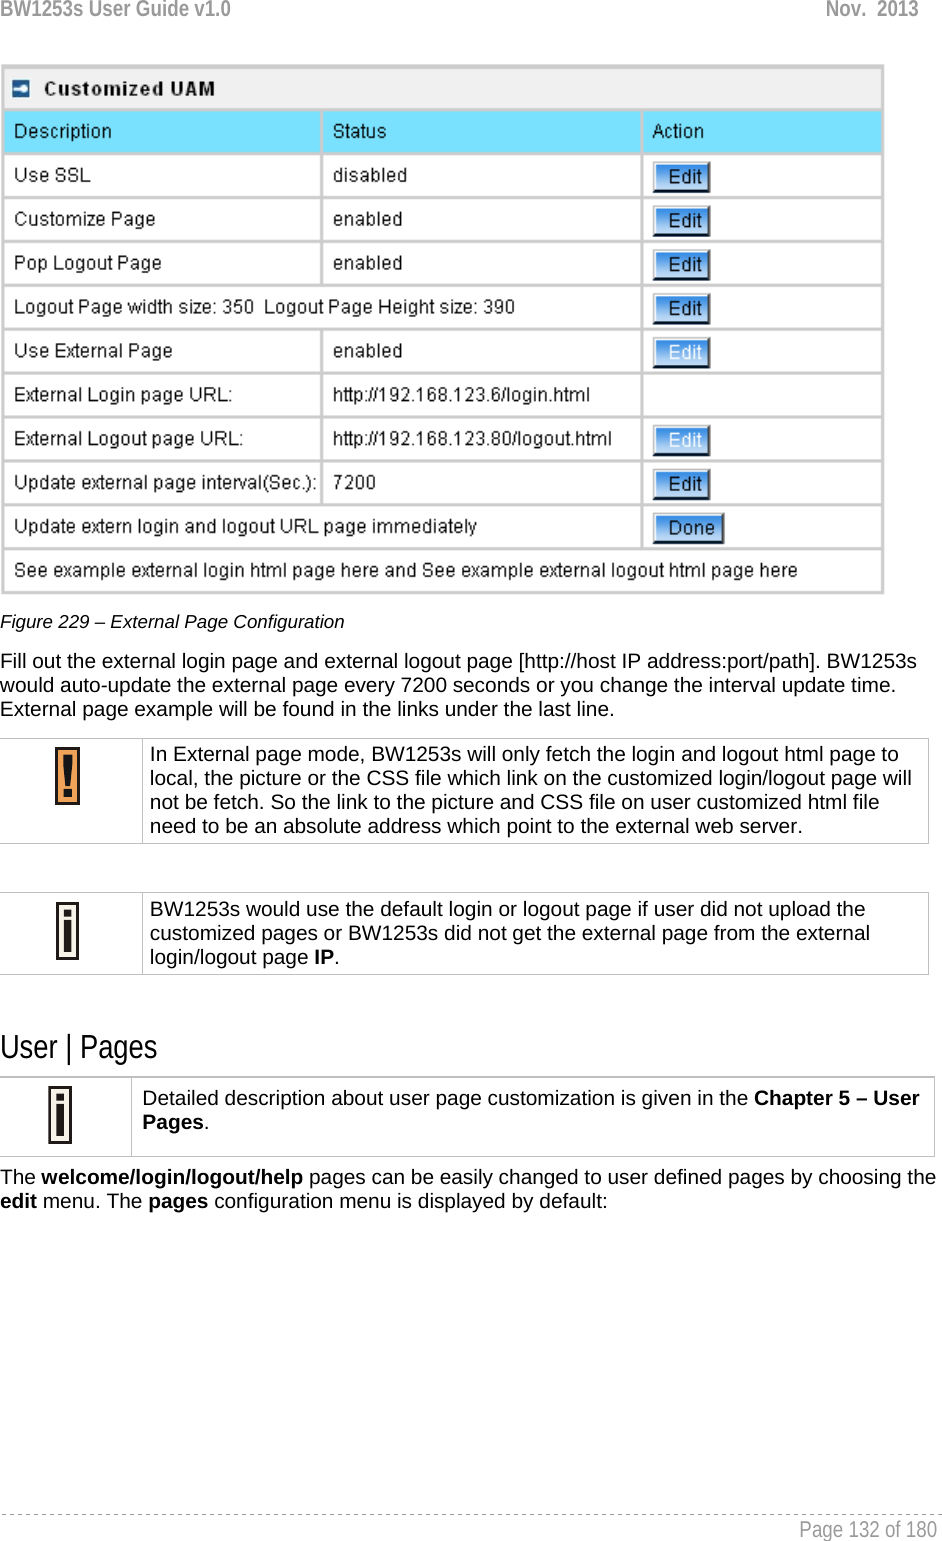 BW1253s User Guide v1.0  Nov.  2013     Page 132 of 180    Figure 229 – External Page Configuration Fill out the external login page and external logout page [http://host IP address:port/path]. BW1253s would auto-update the external page every 7200 seconds or you change the interval update time. External page example will be found in the links under the last line.   User | Pages  Detailed description about user page customization is given in the Chapter 5 – User Pages. The welcome/login/logout/help pages can be easily changed to user defined pages by choosing the edit menu. The pages configuration menu is displayed by default:  In External page mode, BW1253s will only fetch the login and logout html page to local, the picture or the CSS file which link on the customized login/logout page will not be fetch. So the link to the picture and CSS file on user customized html file need to be an absolute address which point to the external web server.  BW1253s would use the default login or logout page if user did not upload the customized pages or BW1253s did not get the external page from the external login/logout page IP. 